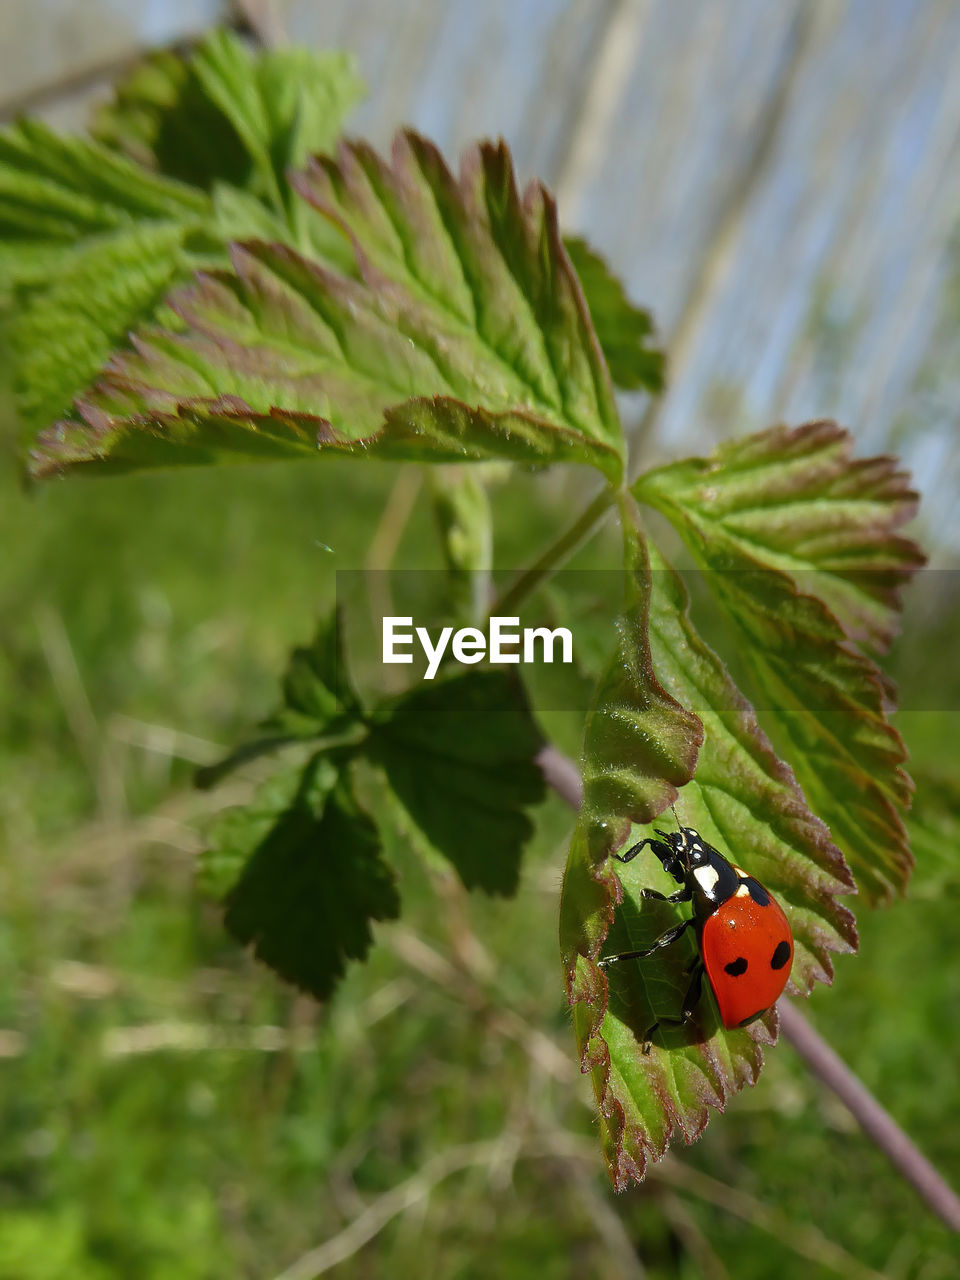 ladybug, animal themes, animal, animal wildlife, beetle, insect, plant, nature, wildlife, one animal, leaf, plant part, close-up, no people, green, flower, macro photography, tree, outdoors, focus on foreground, red, day, spotted, beauty in nature, branch, selective focus, environment